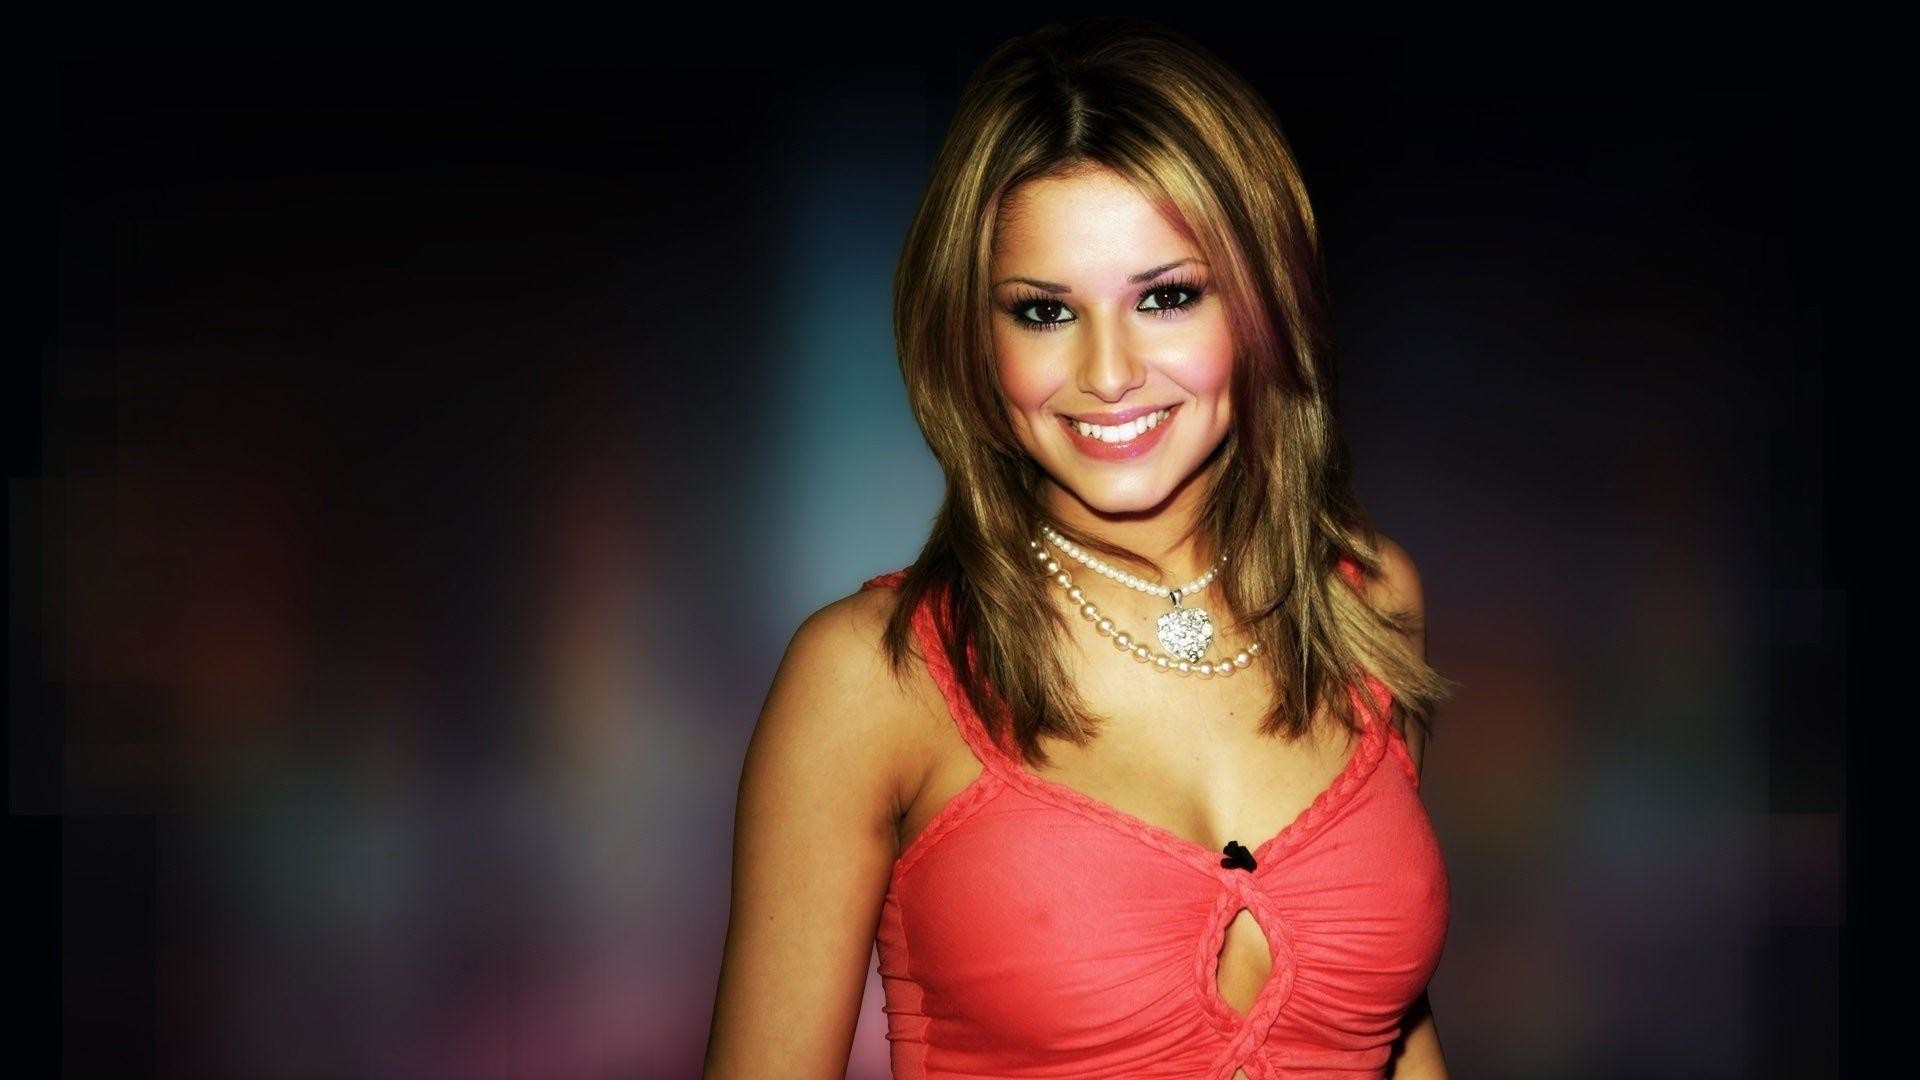 1920x1080 Cheryl Cole Wallpapers Images Photos Pictures Backgrounds